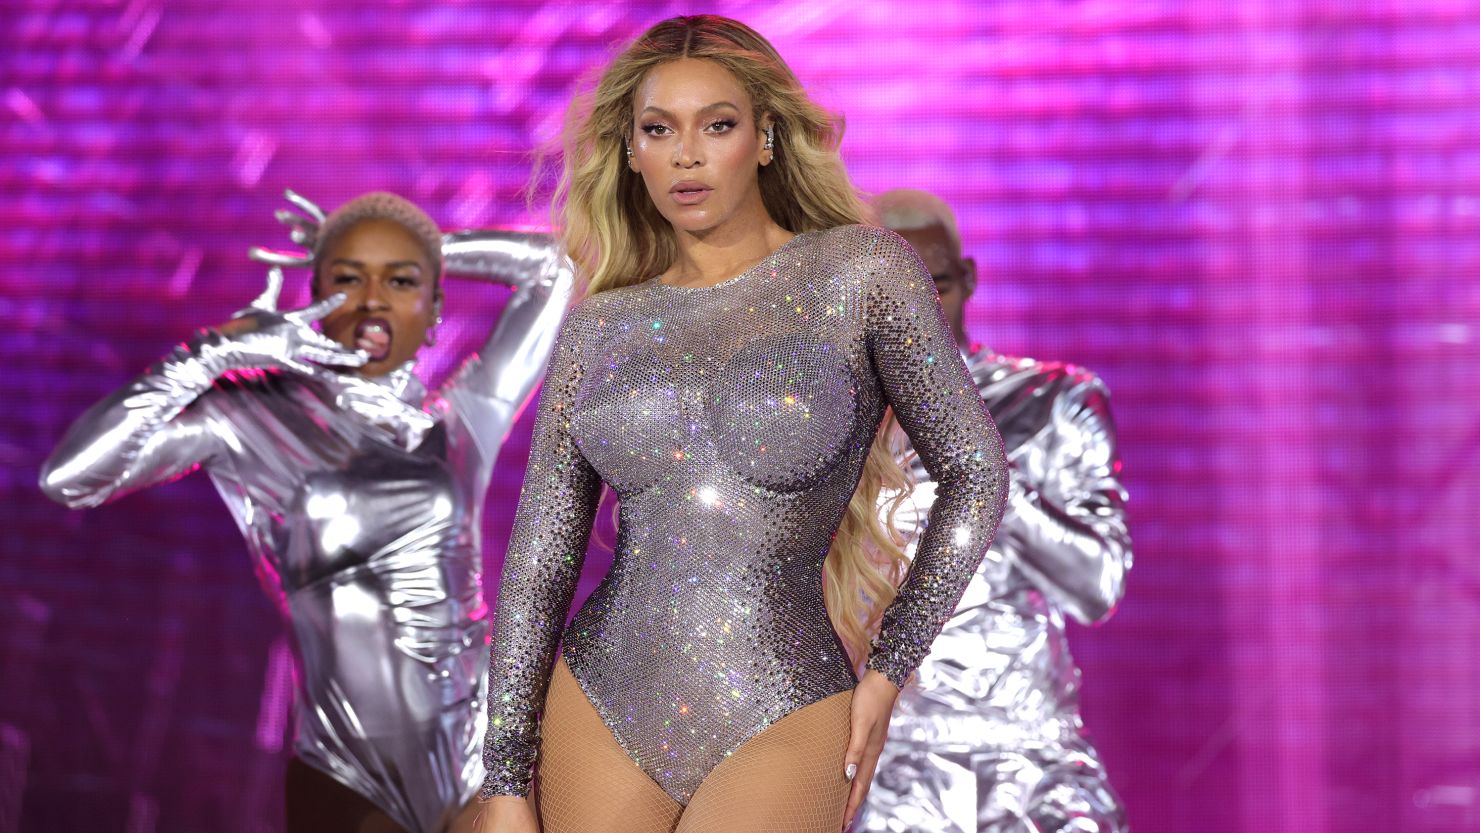 Beyoncé performs onstage during the "Renaissance World Tour" at MetLife Stadium on July 29 in New Jersey.